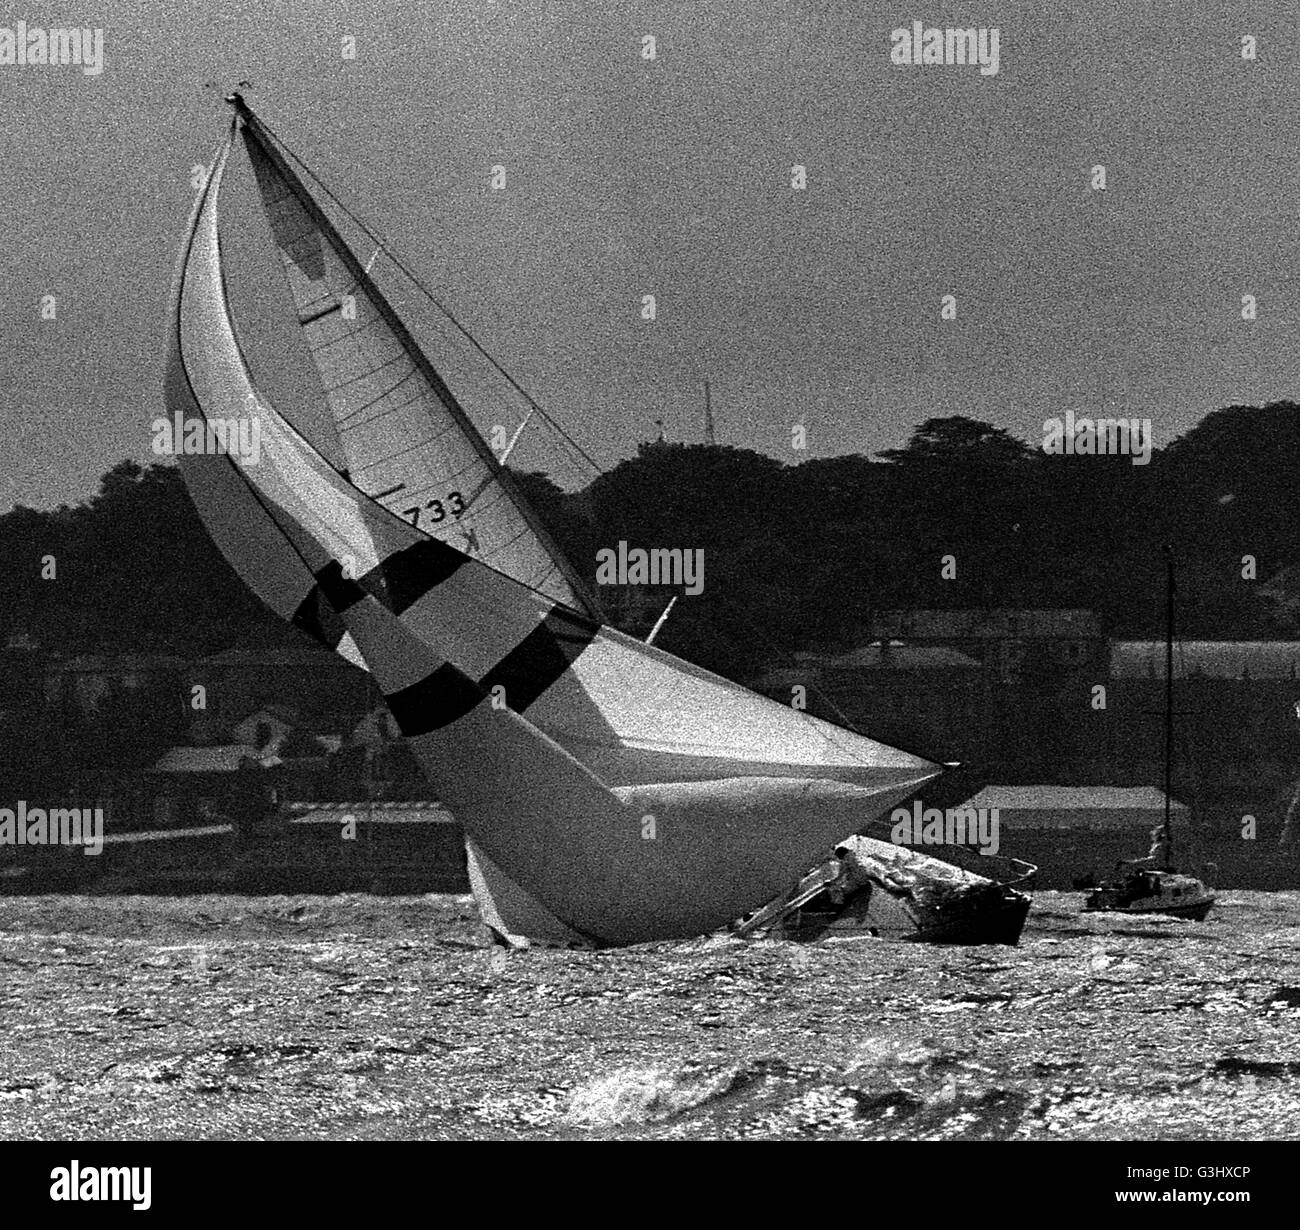 AJAXNETPHOTO. 1979. SOLENT, ENGLAND. - ADMIRAL'S CUP - SOLENT INSHORE RACE. BLIZZARD (GBR) IN TROUBLE IN GUSTY CONDITIONS. PHOTO:JONATHAN EASTLAND/AJAX REF:79 2026 Stock Photo